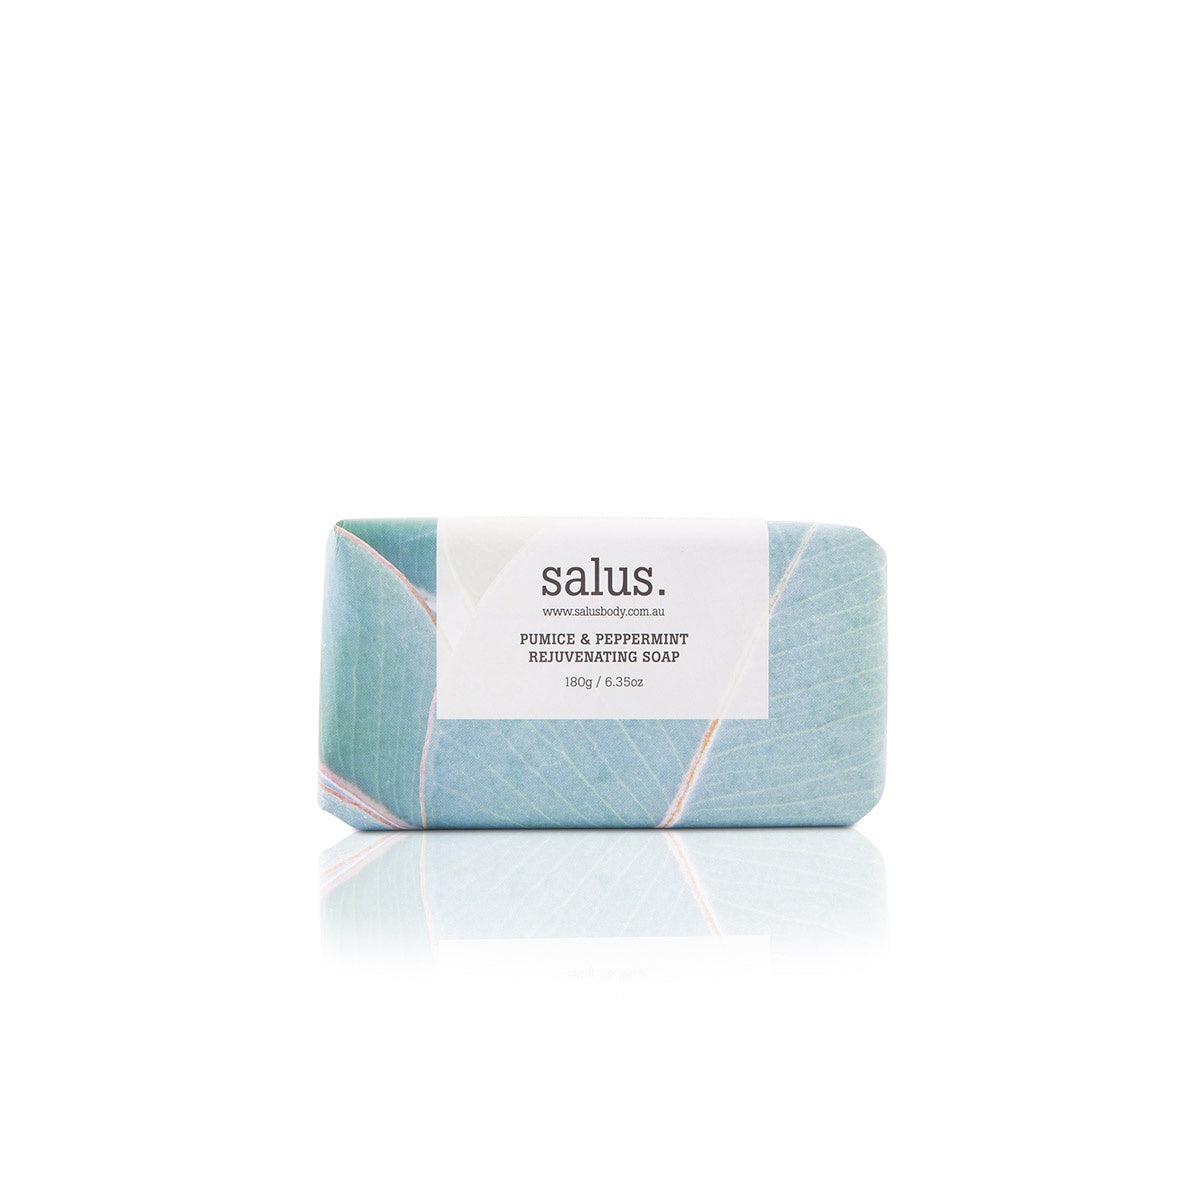 Pumice and Peppermint Rejuvenating Soap 180g